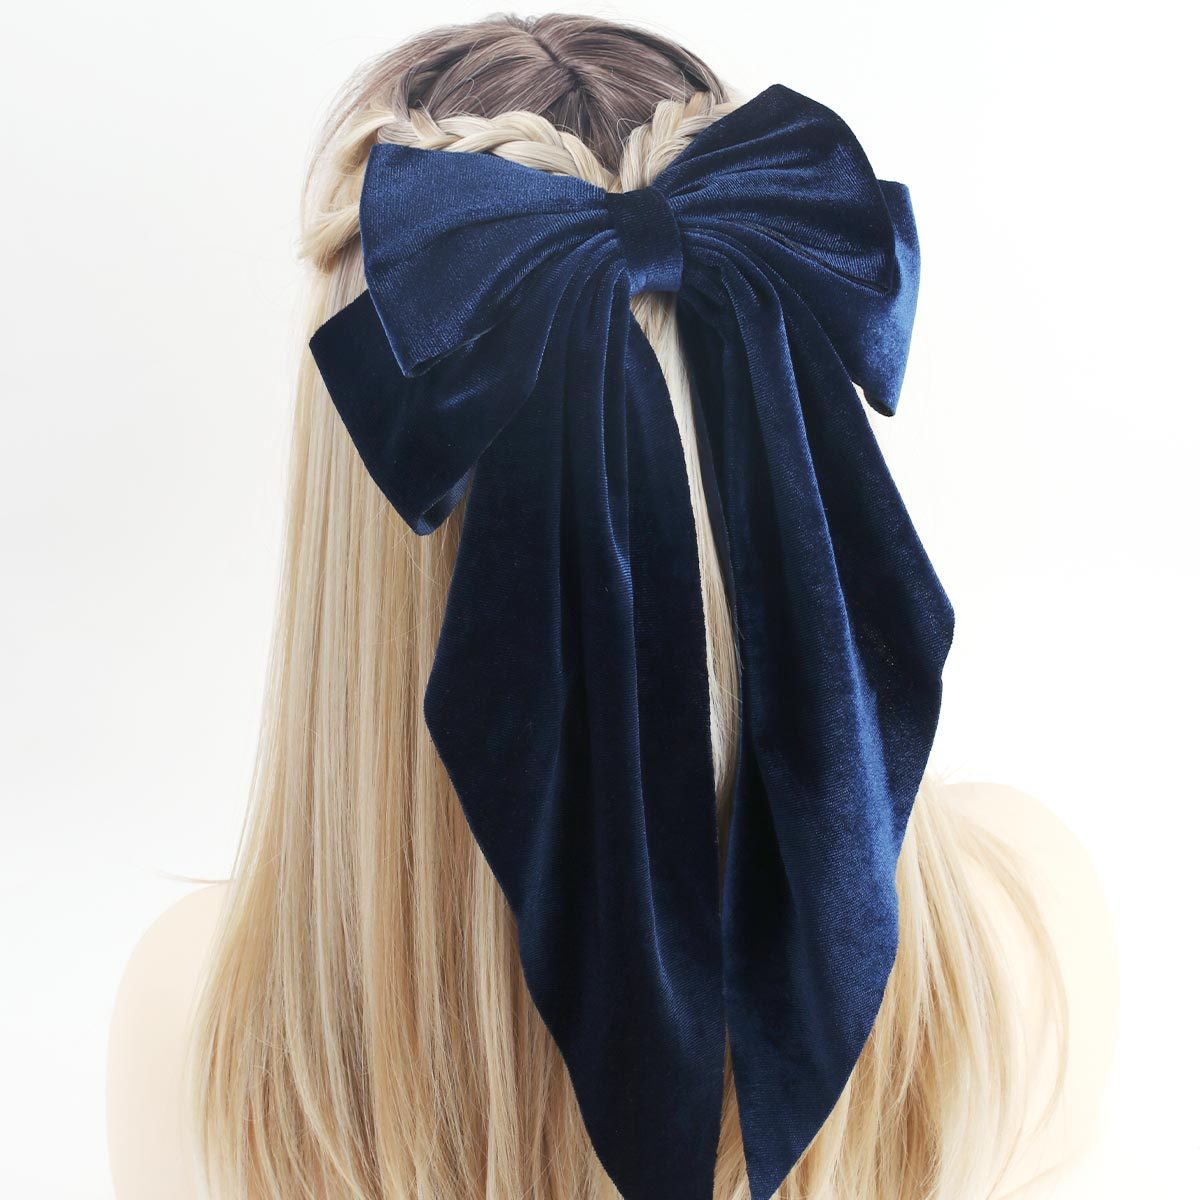 Wrapped in a Velvet Bow